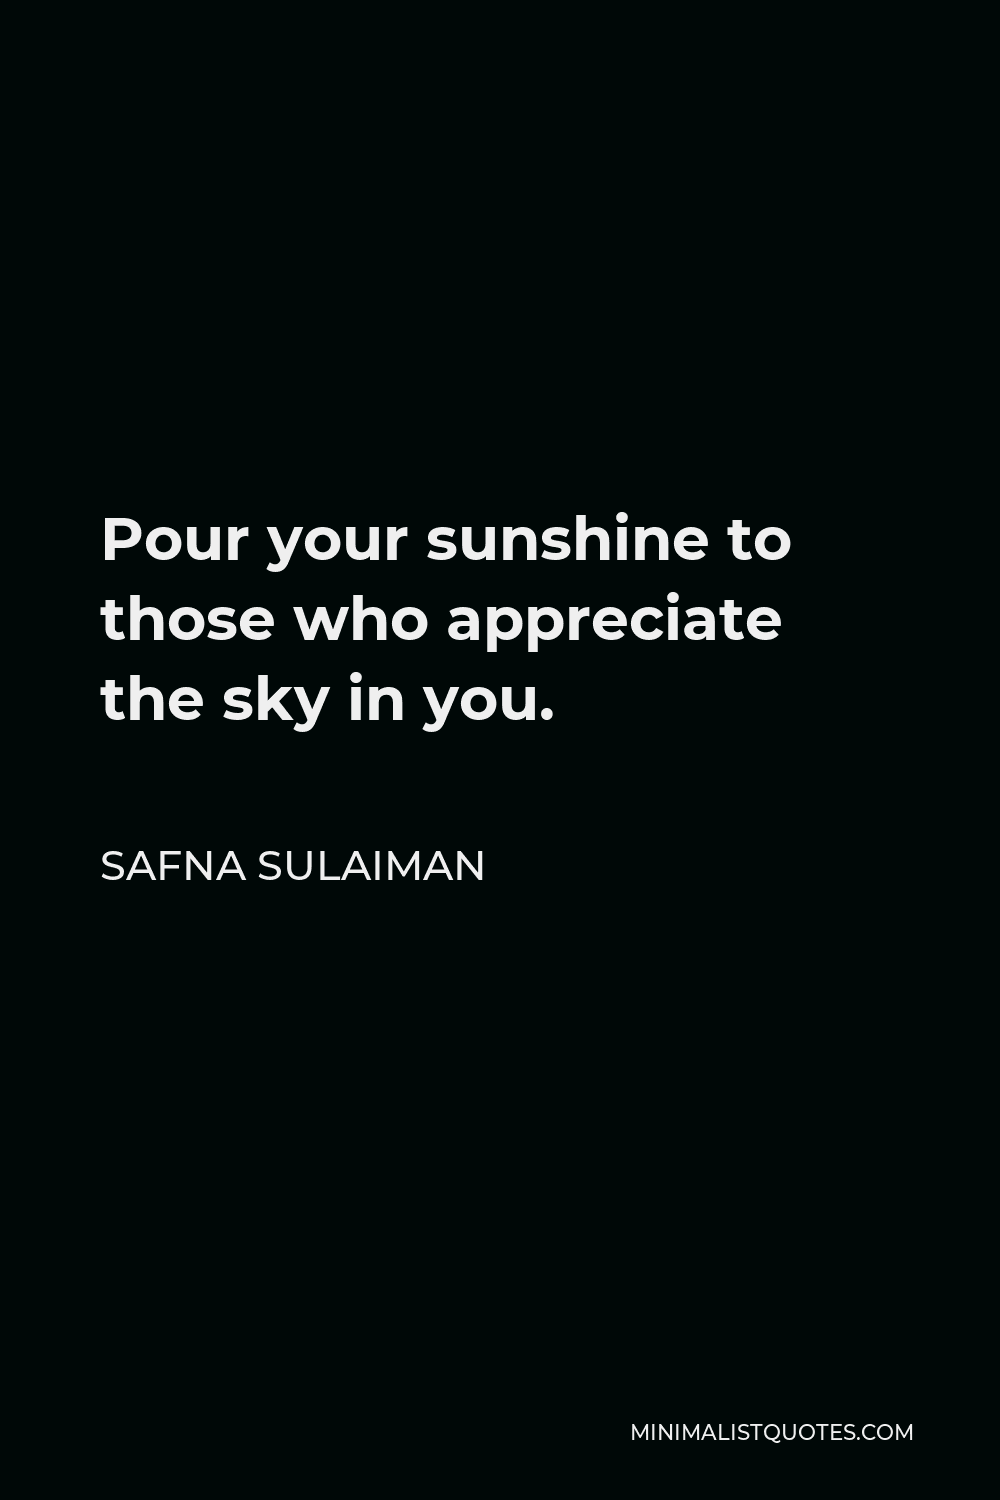 Safna Sulaiman Quote - Pour your sunshine to those who appreciate the sky in you.